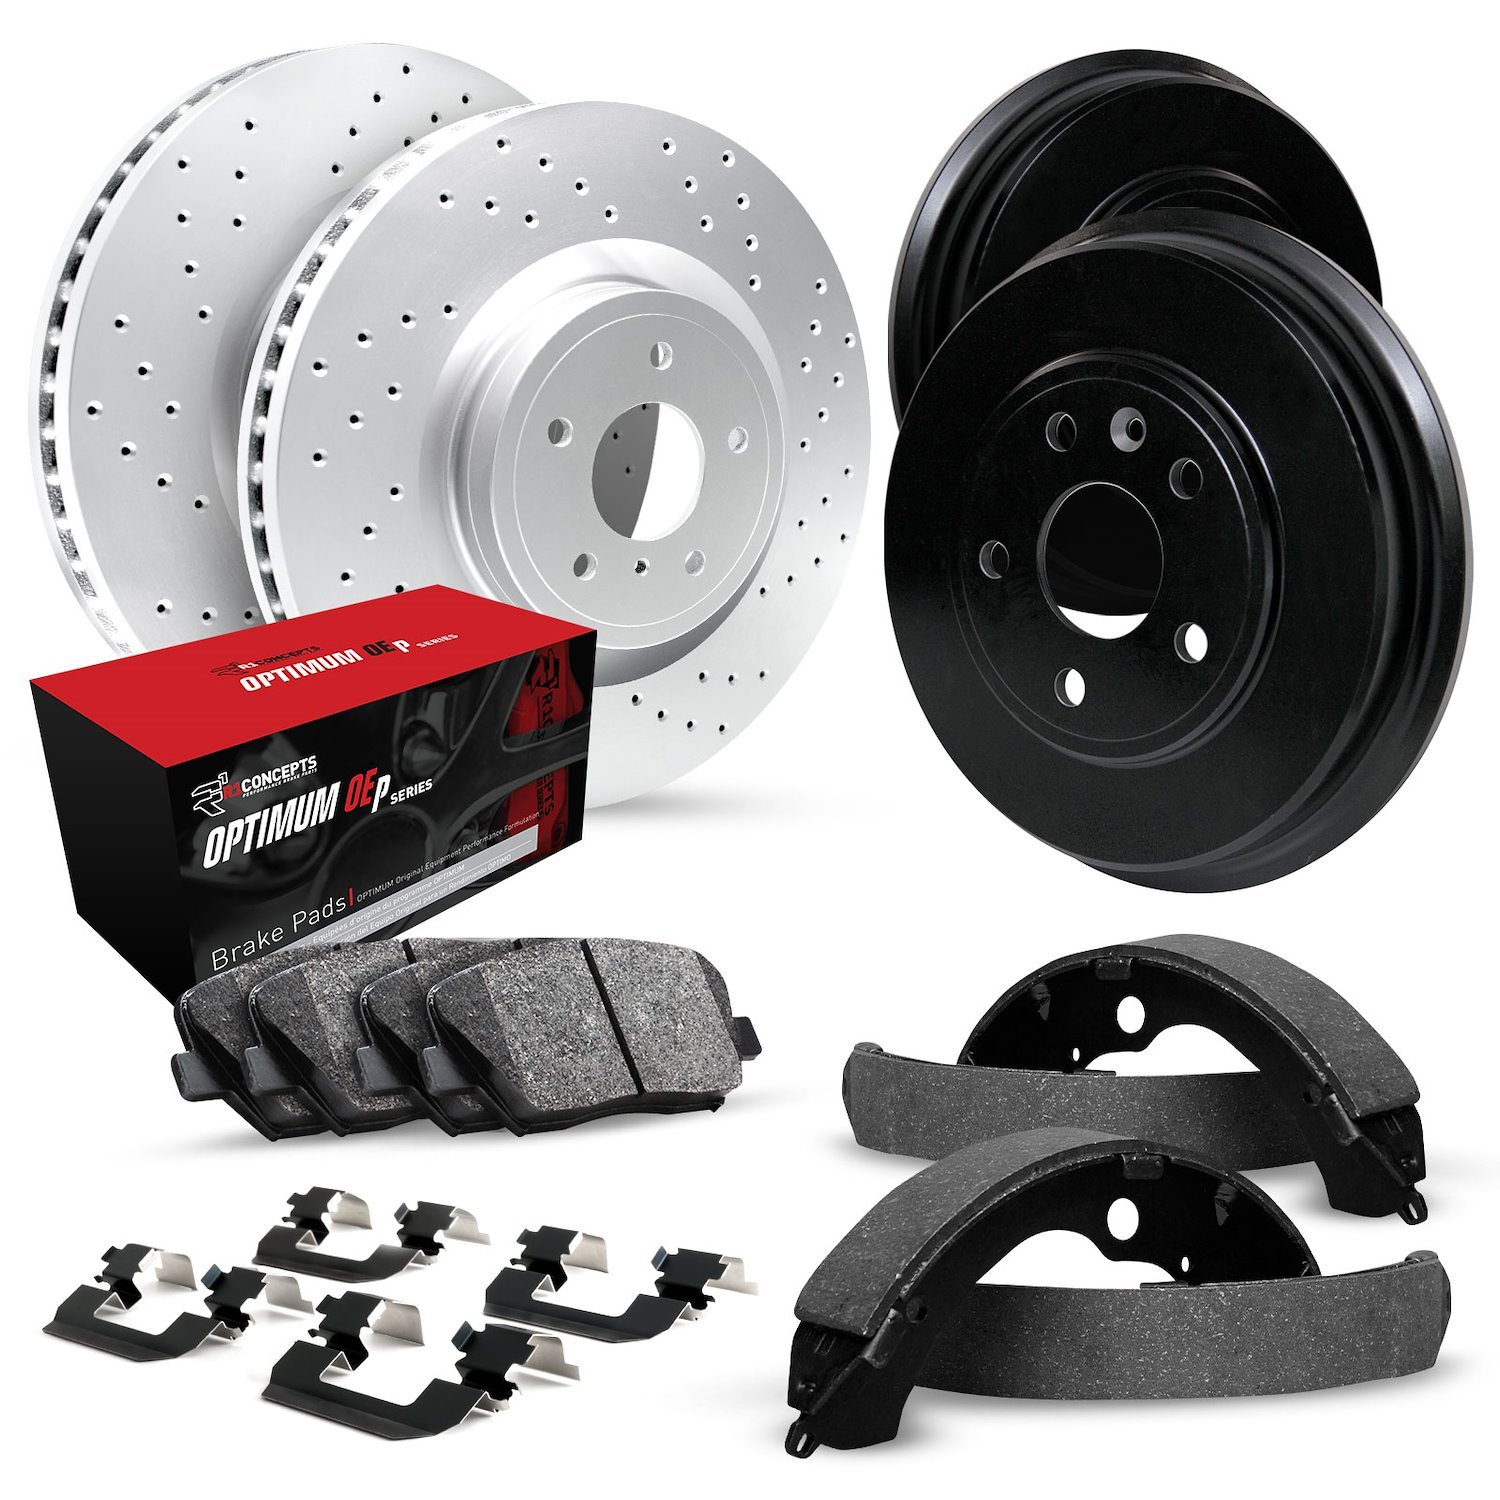 GEO-Carbon Drilled Brake Rotor & Drum Set w/Optimum OE Pads, Shoes, & Hardware, 1967-1968 GM, Position: Front & Rear